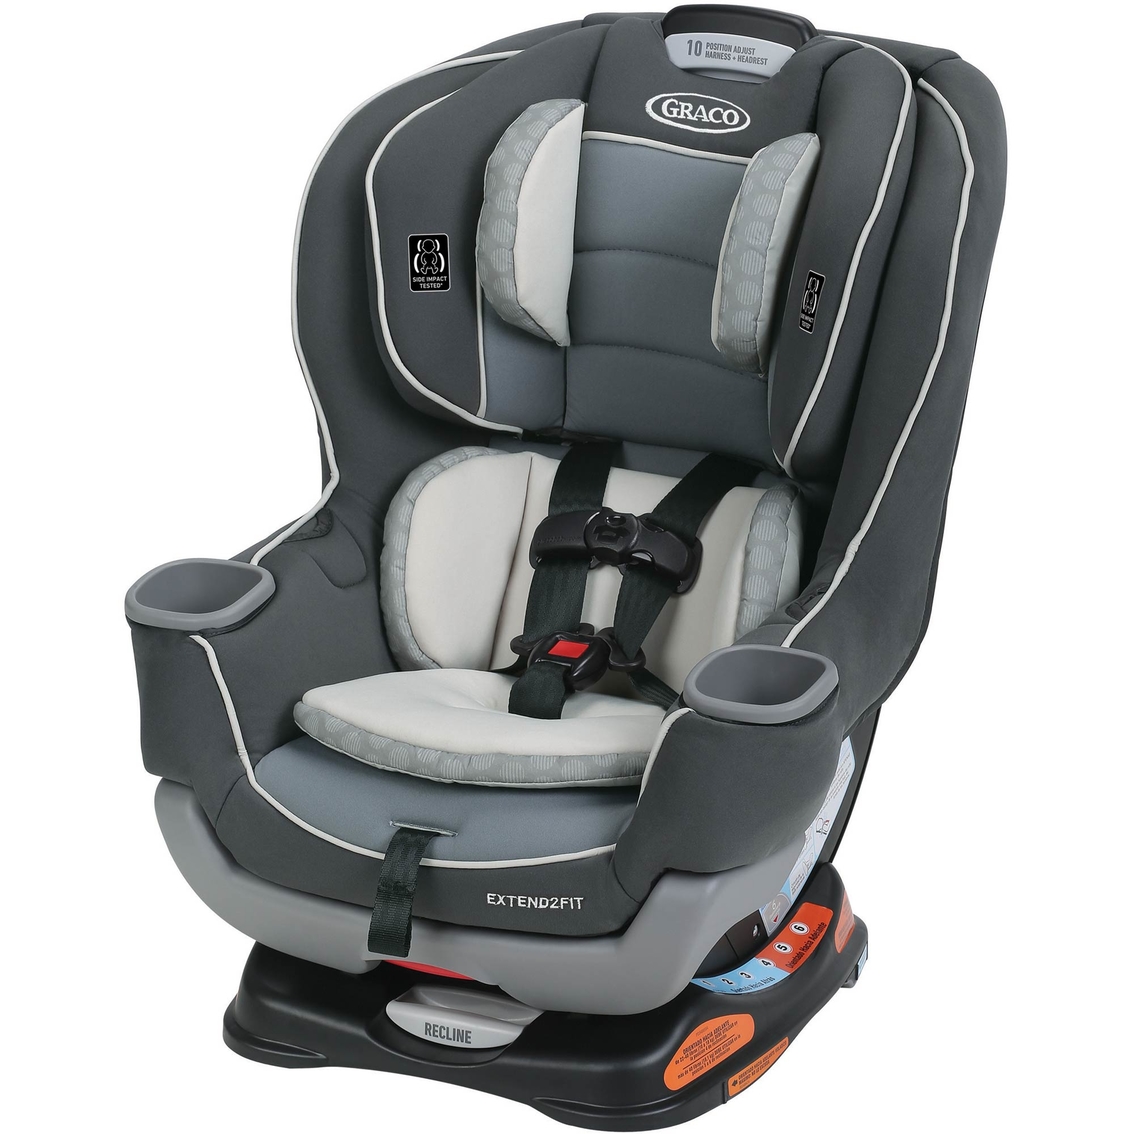 Graco Extend2fit Convertible Car Seat | Convertible Car Seats | Baby